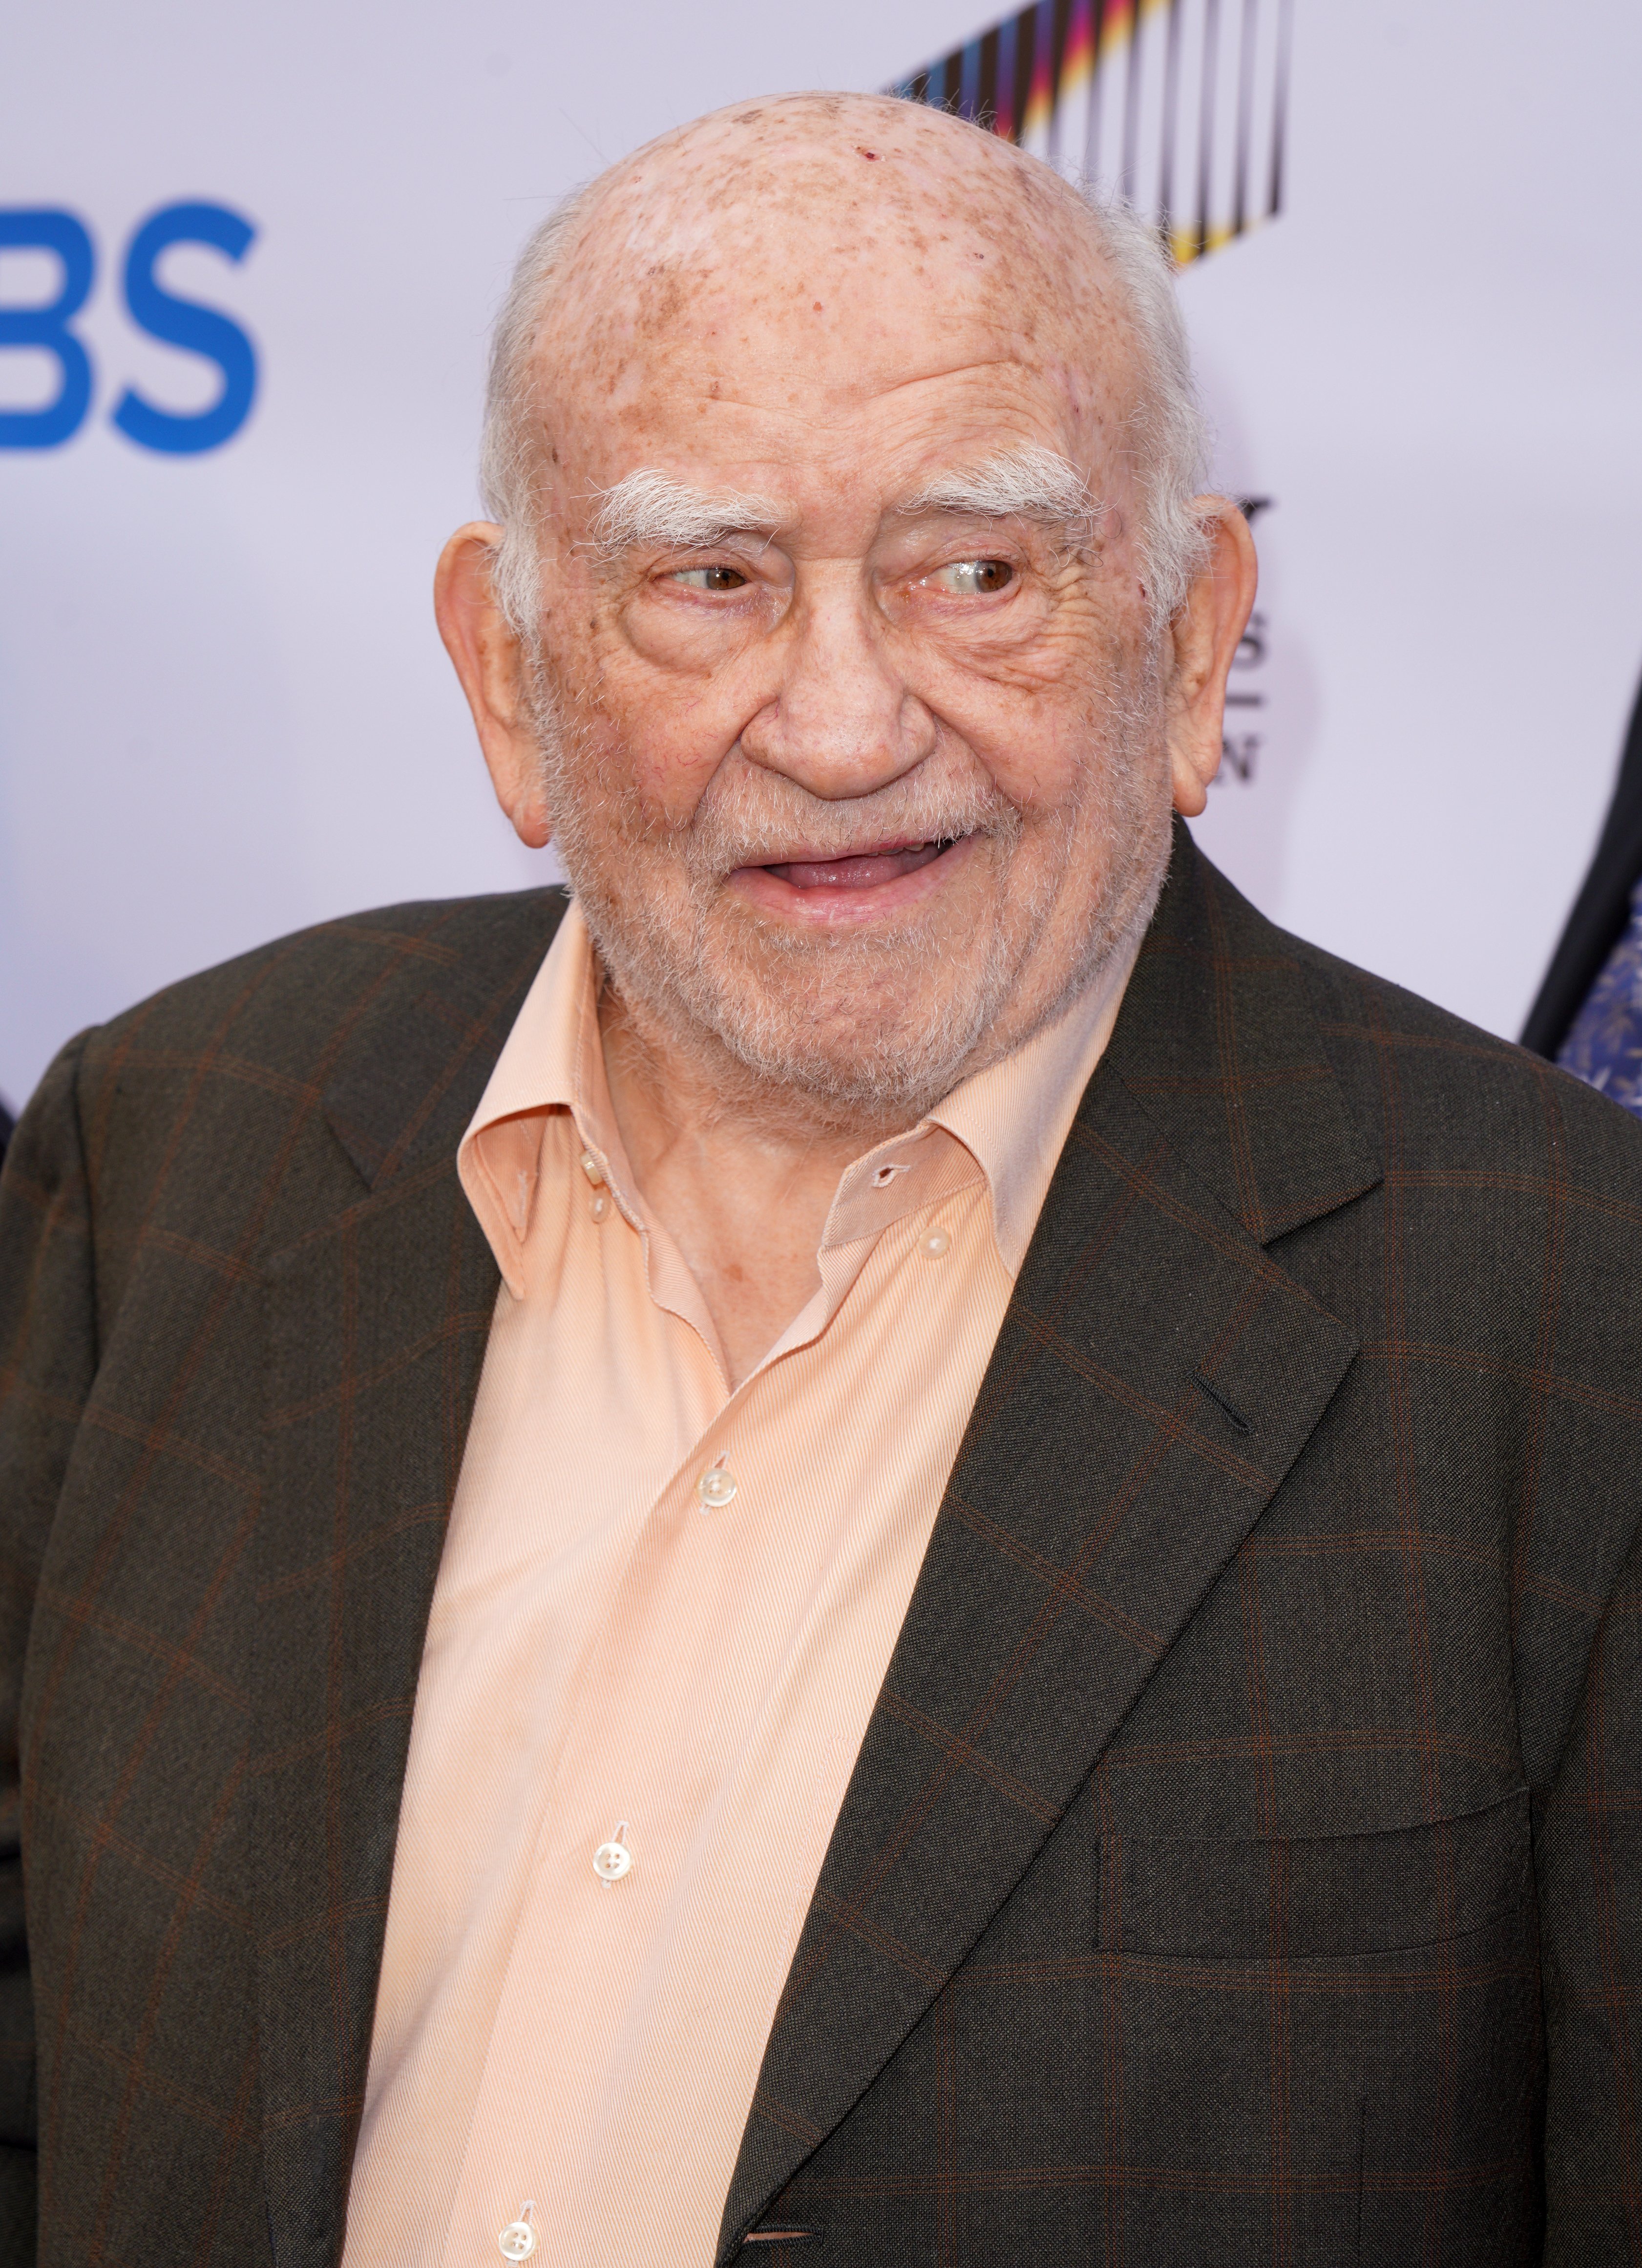 Ed Asner at the 7th Annual Ed Asner And Friends Poker Tournament Celebrity Night, 2019, Studio City, California. | Photo: Getty Images